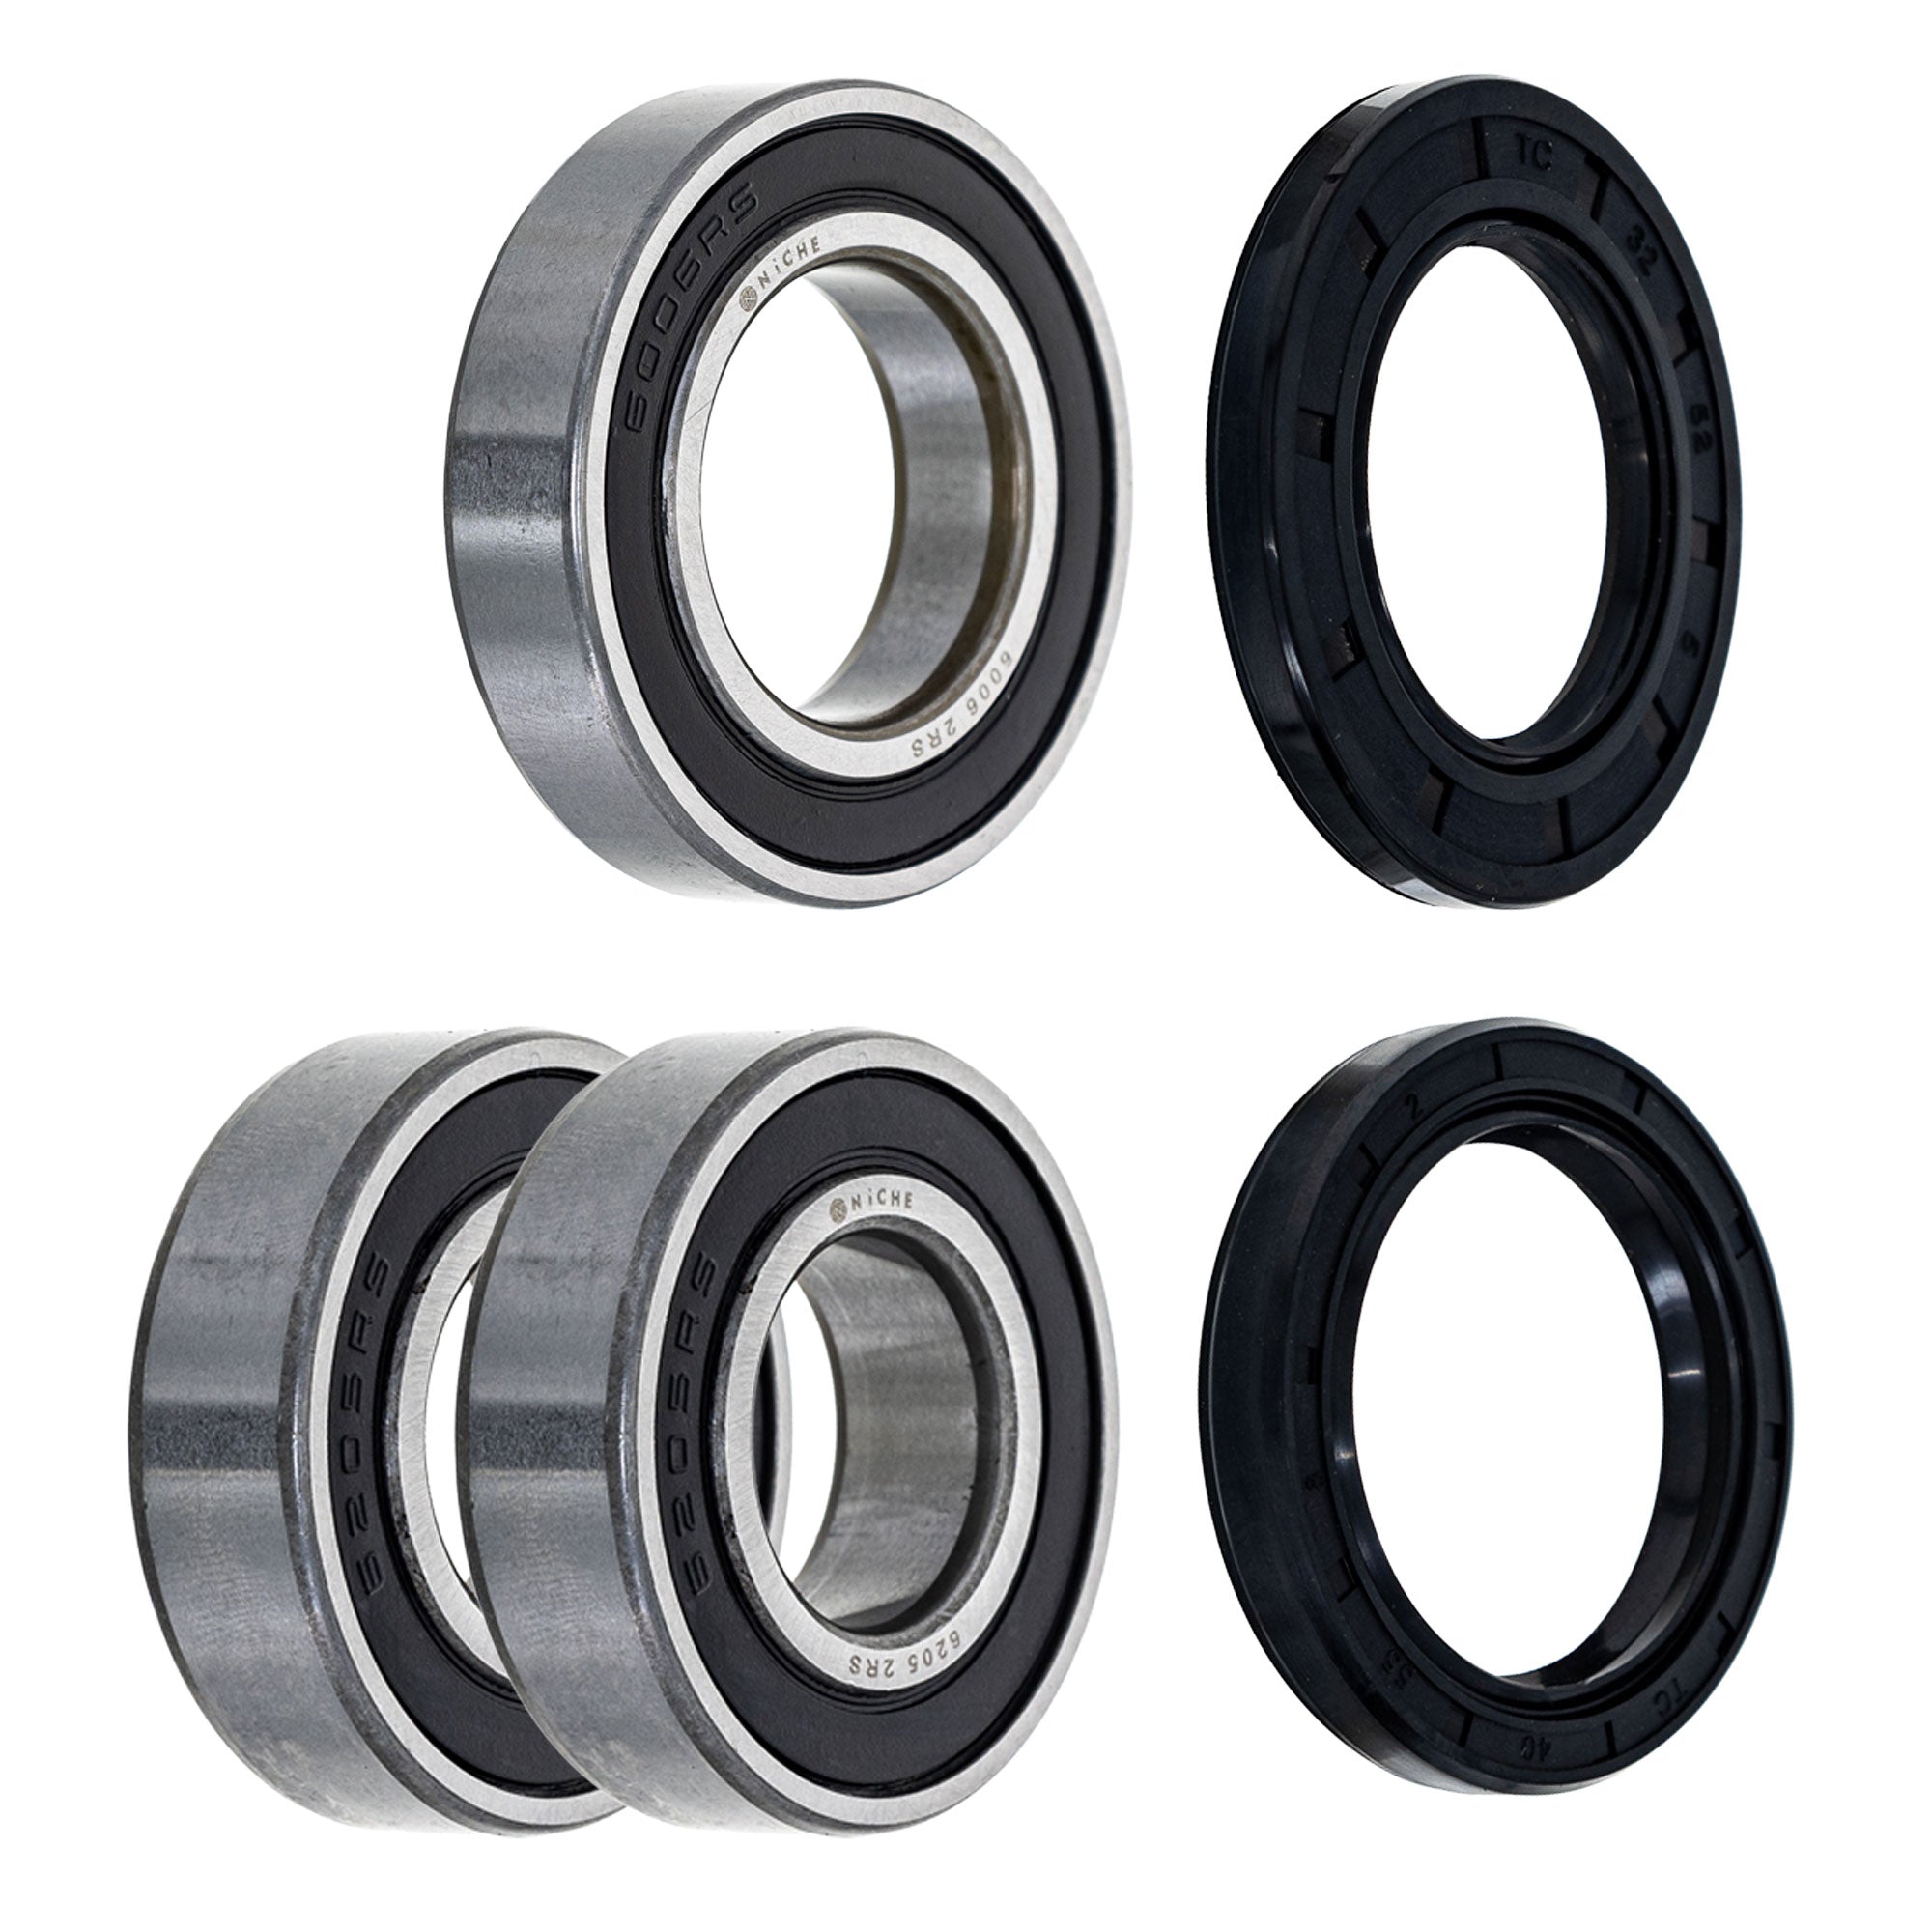 Wheel Bearing Seal Kit for zOTHER Ref No Z1000 NICHE MK1008920